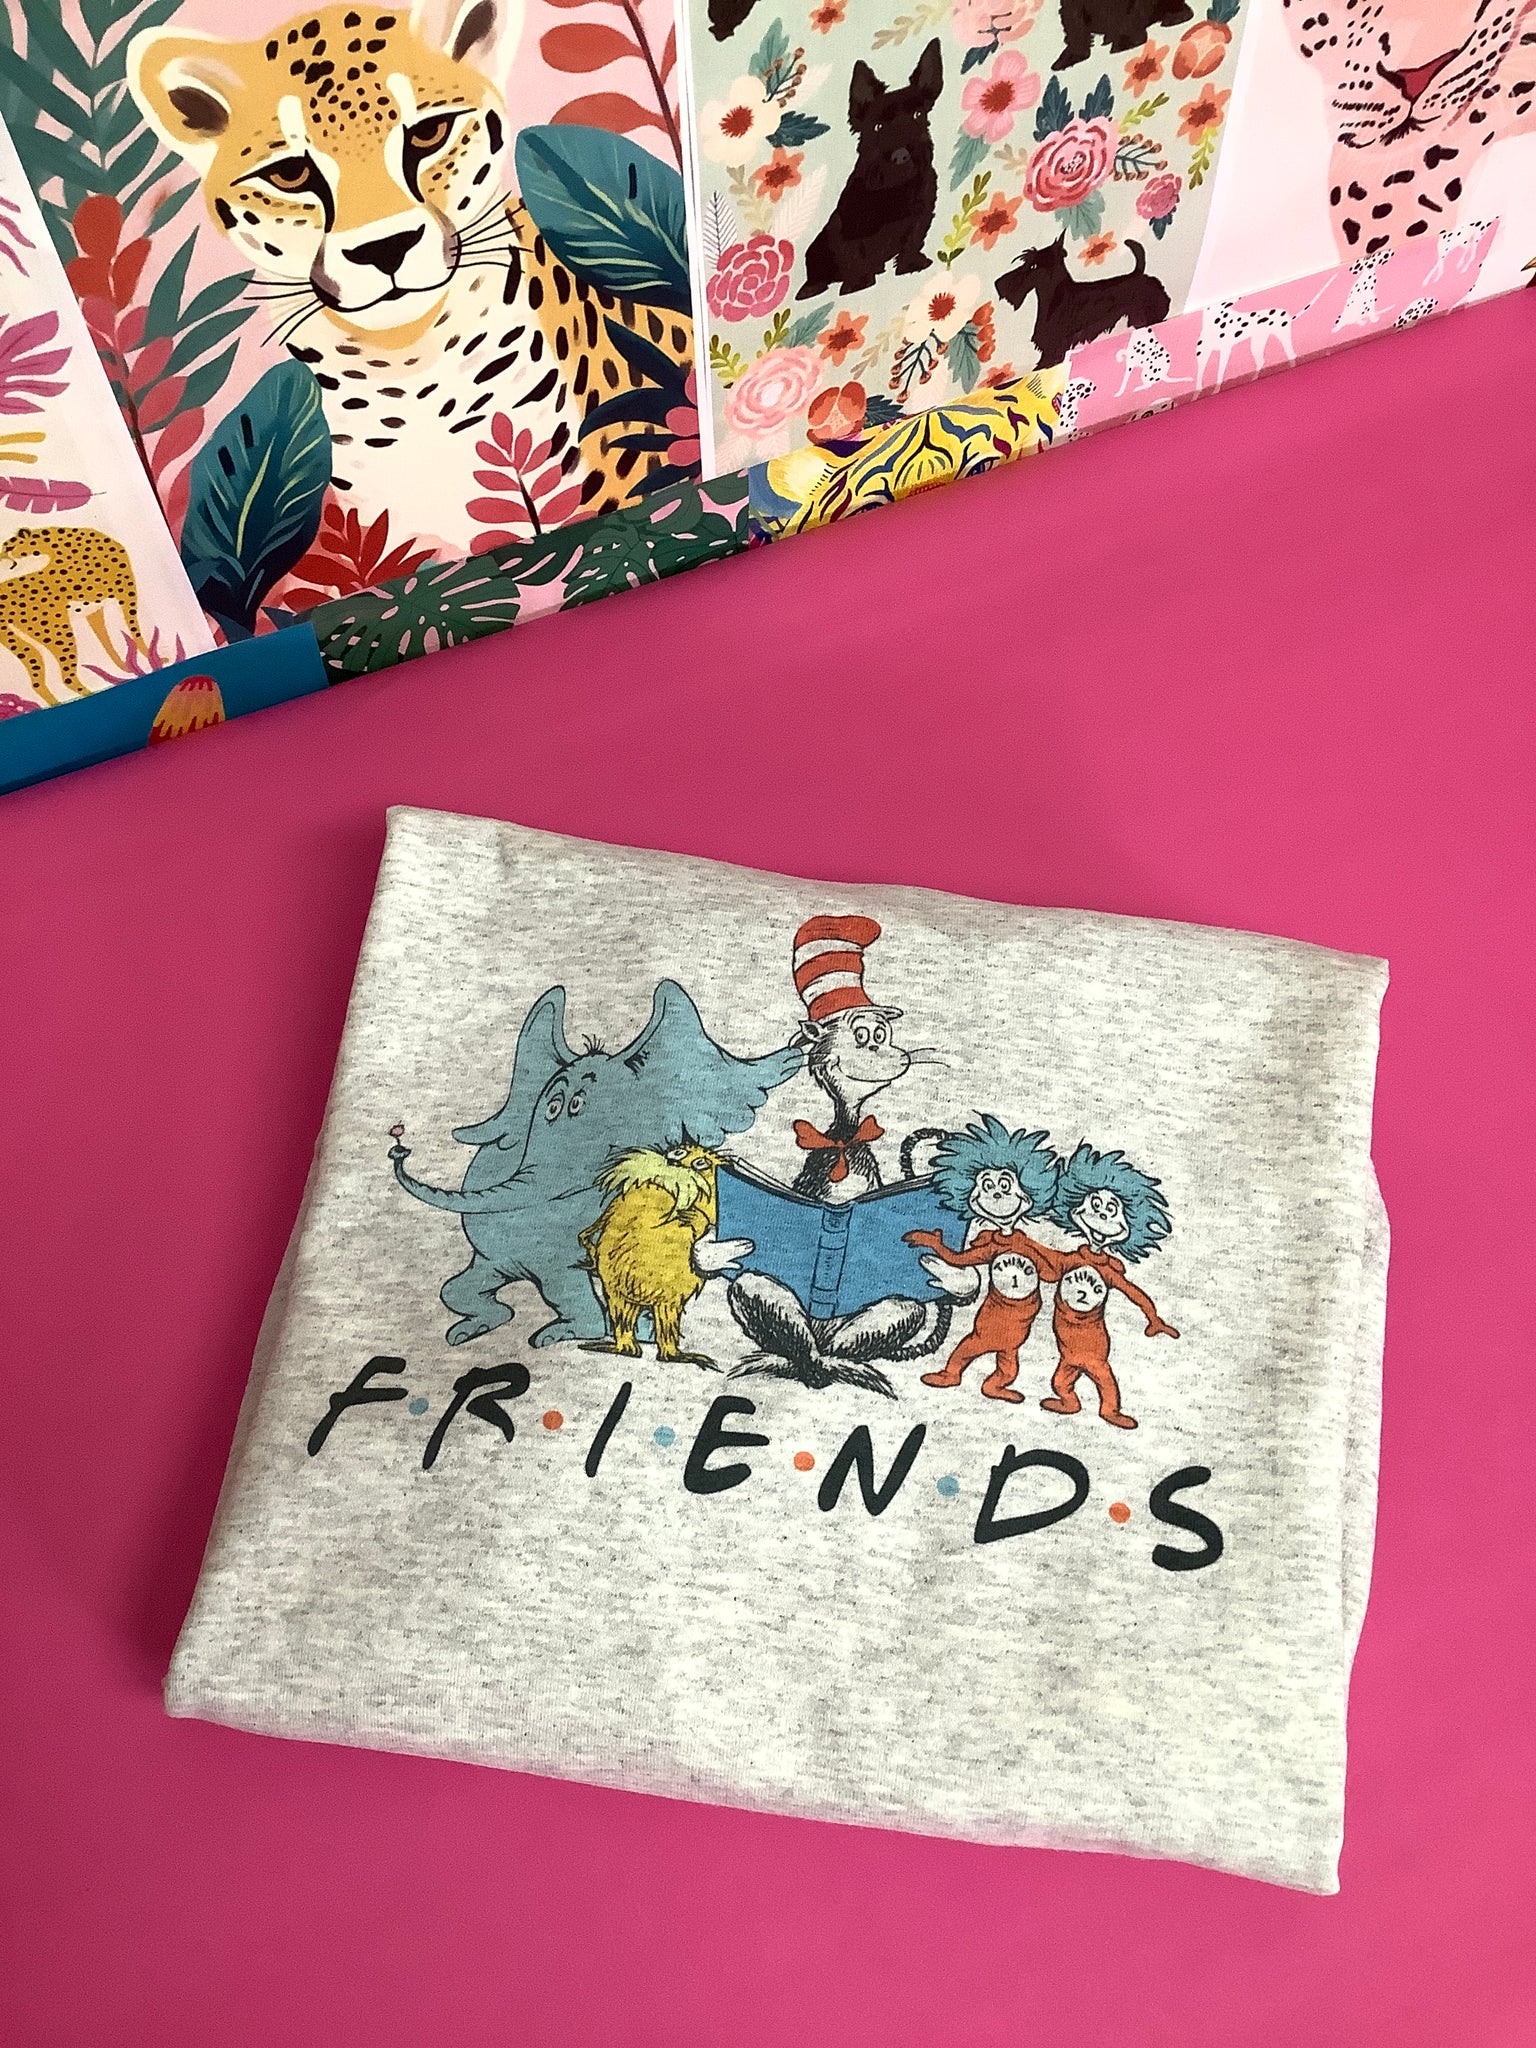 Dr Seuss Friends  - National Reading Week ~ Vintage Graphic Shirts -Ash Color Shirt - Choose T-shirt or Sweatshirt ~ Ships in 3-5 days ~ Custom Made~ please read descriptions before ordering